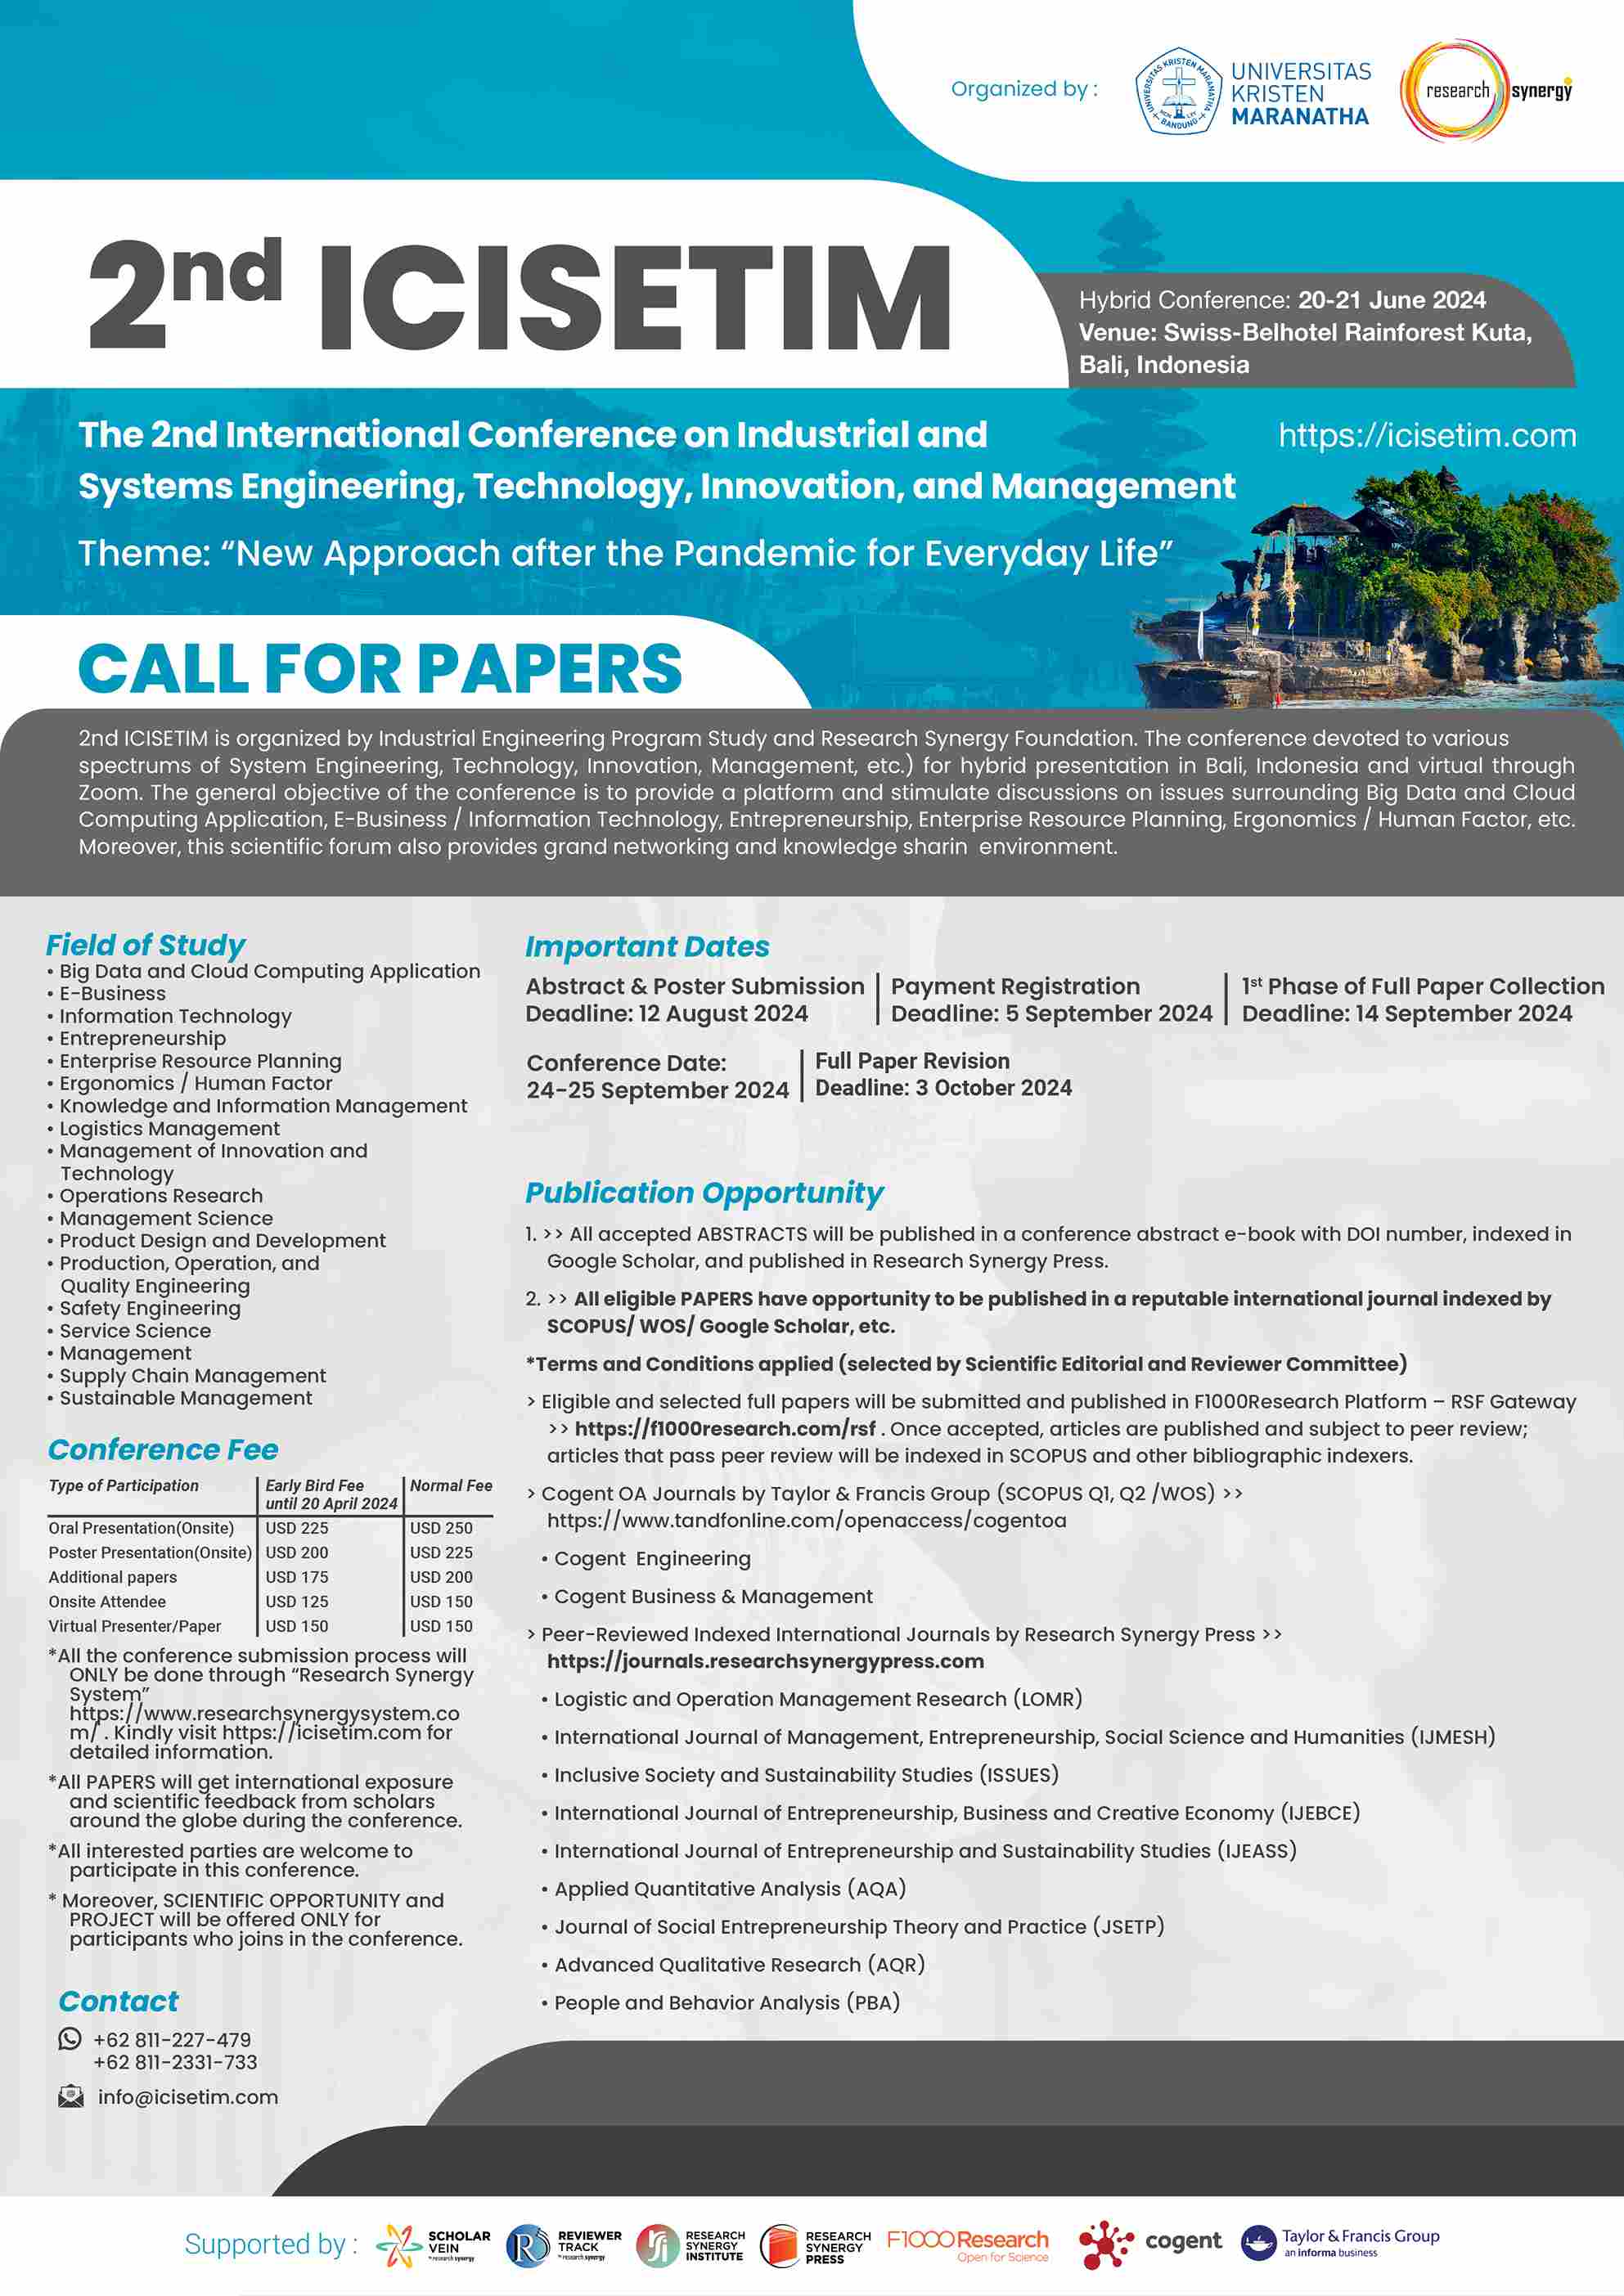 2nd International Conference on Industrial and Systems Engineering, Technology, Innovation, and Management (2nd ICISETIM)